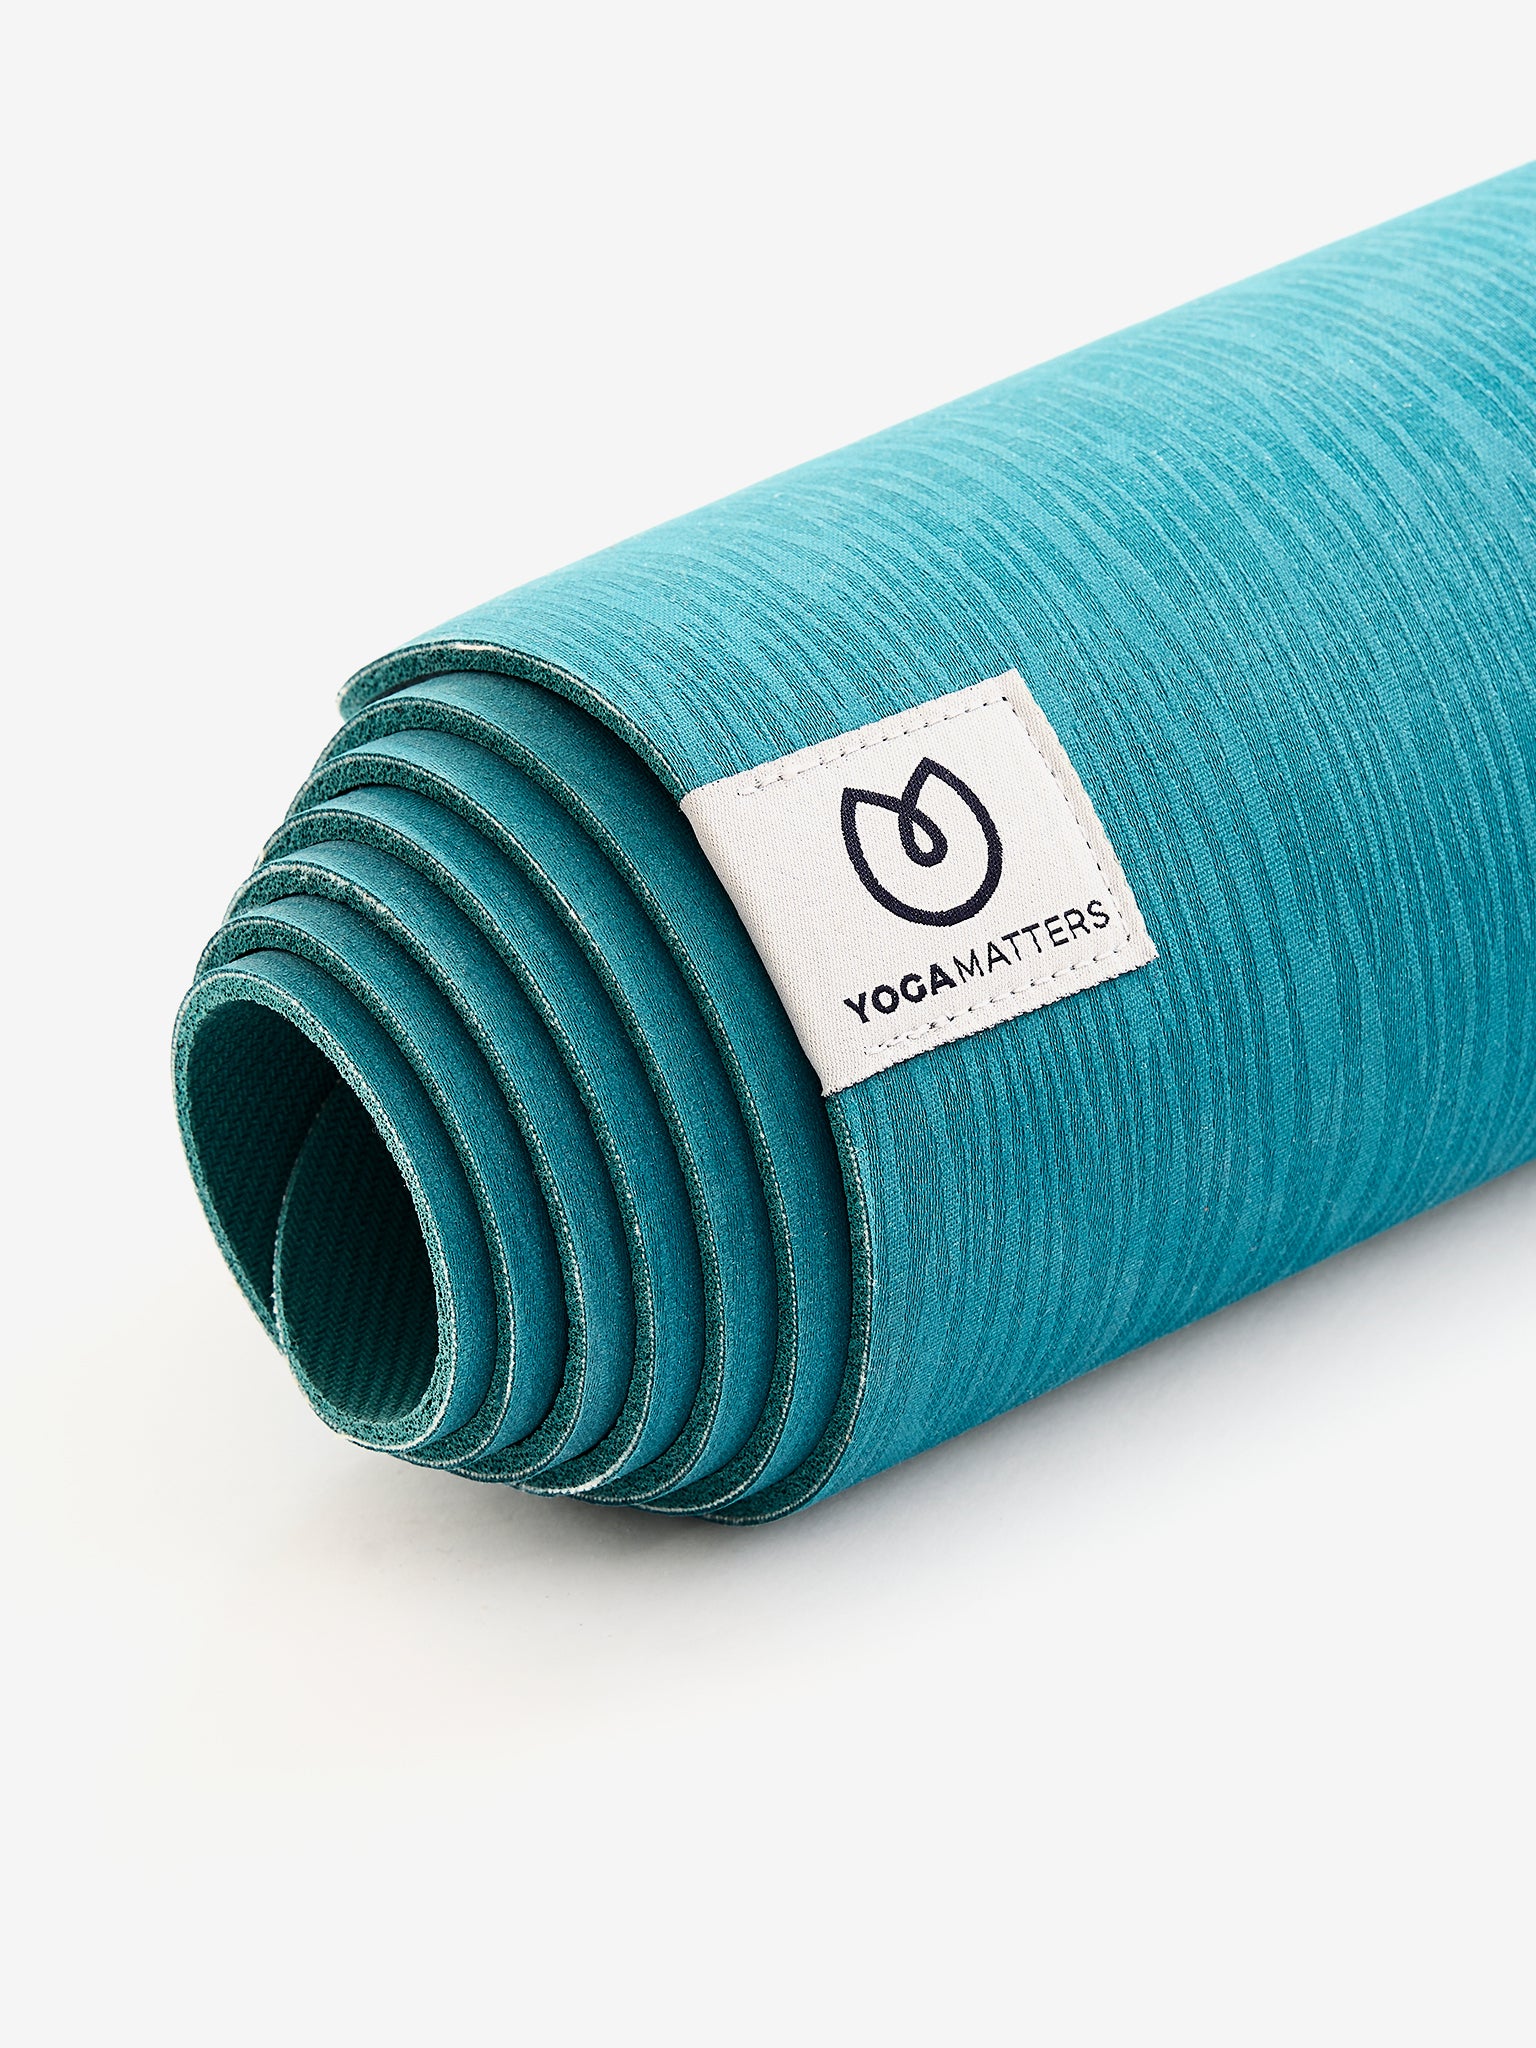 YogaMatters teal textured yoga mat rolled up, side angle view on a white background